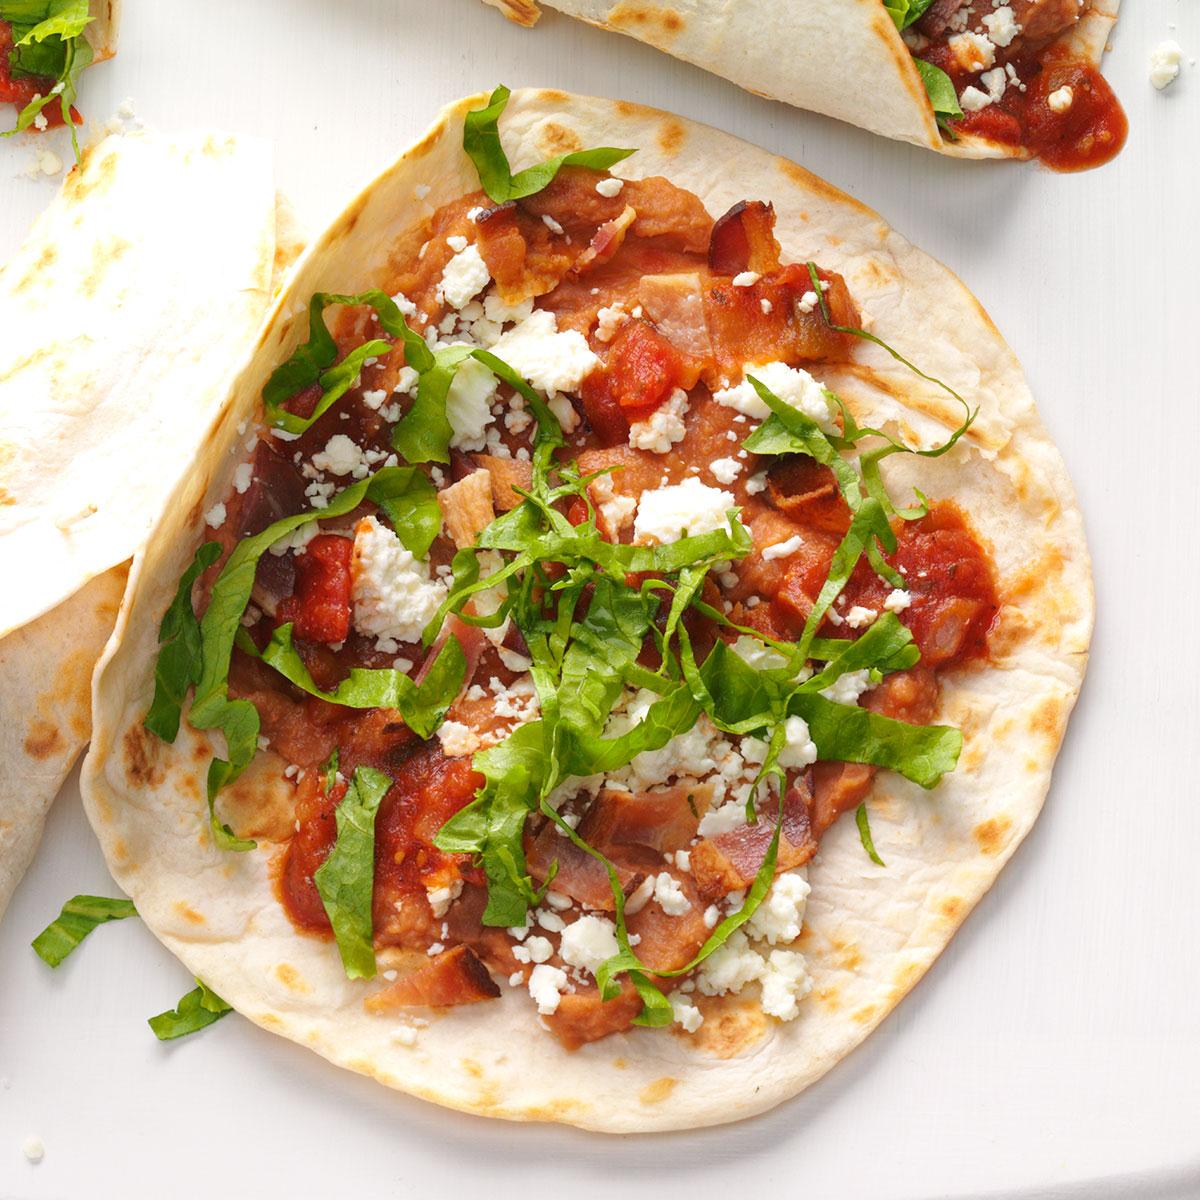 These griddle burritos with bacon and veggies make an awesome hand-held meal. I use fresh pico de gallo when I can, but a jar of salsa works if that’s what you’ve got. —Stacy Mullens, Gresham, Oregon <a href="https://www.tasteofhome.com/recipes/bean-bacon-griddle-burritos/">Get Recipe</a>